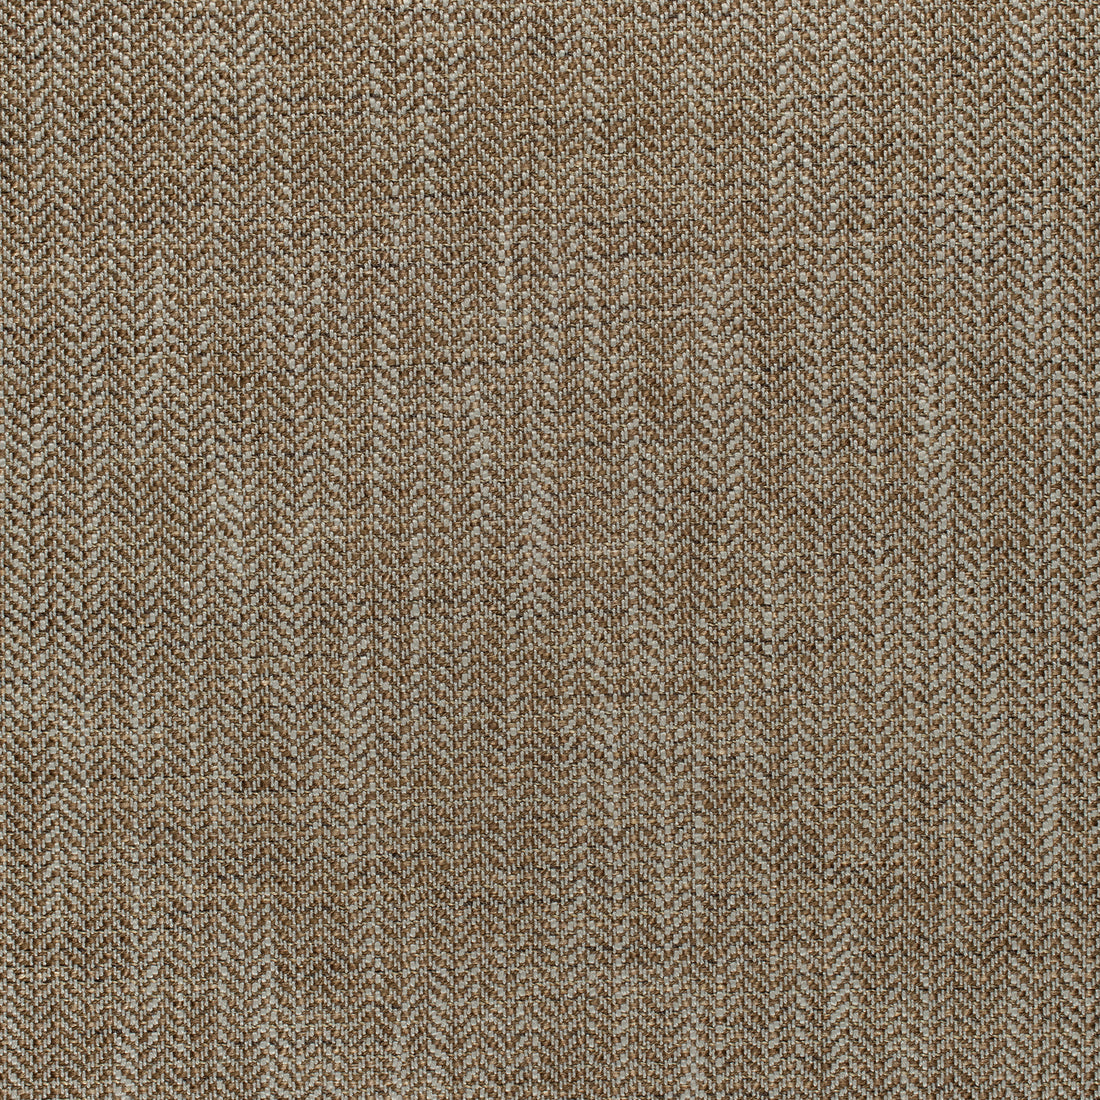 Ashbourne Tweed fabric in bark color - pattern number W80617 - by Thibaut in the Pinnacle collection